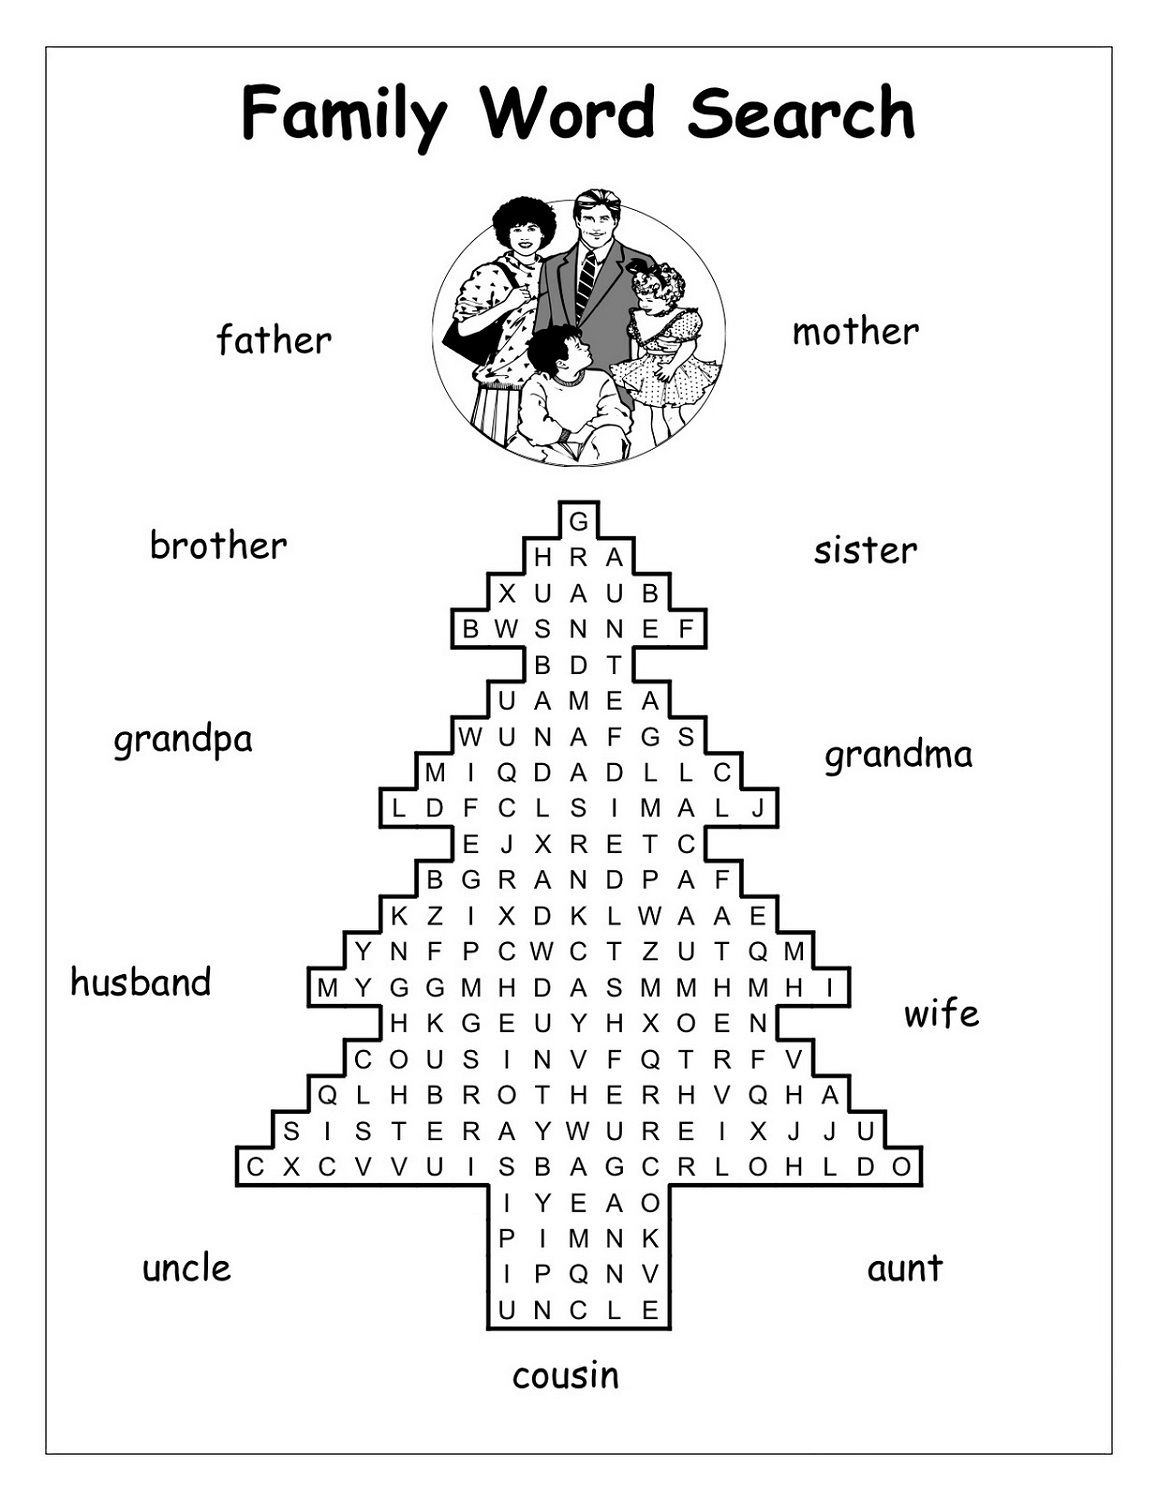 family-word-search-puzzle